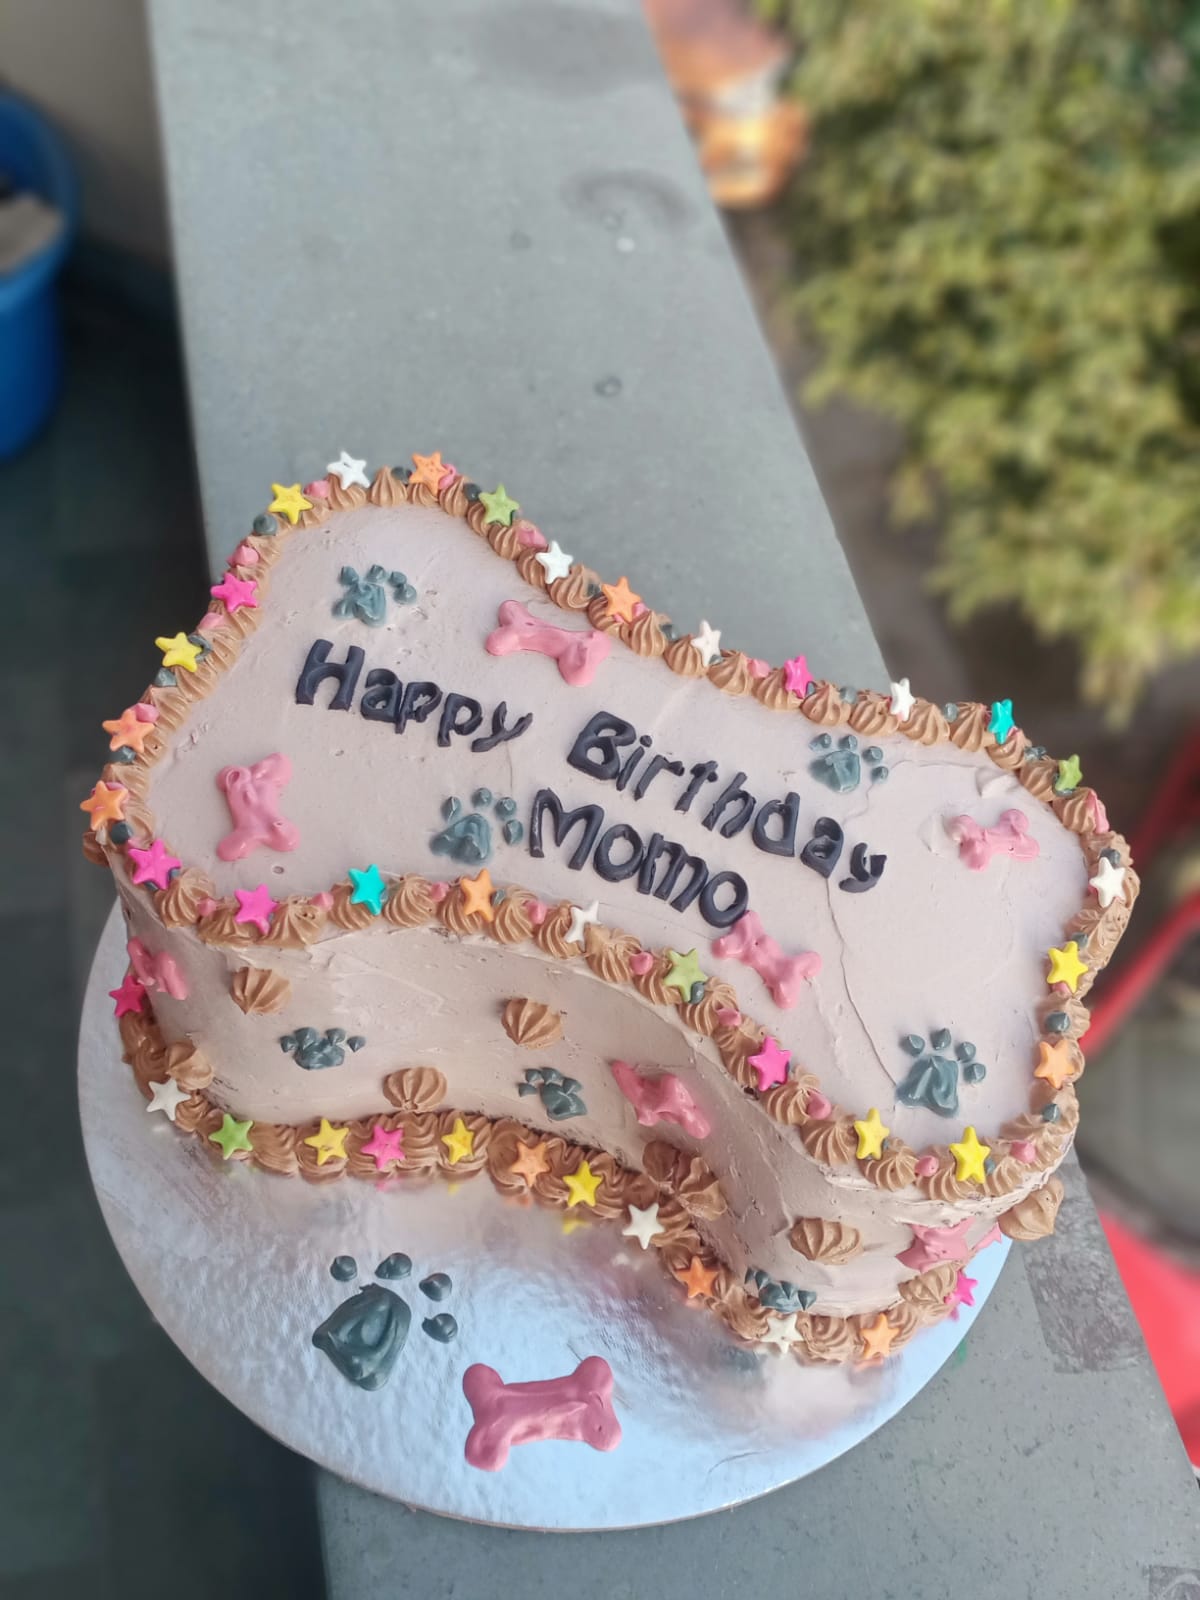 Pets Cake Designs, Images, Price Near Me